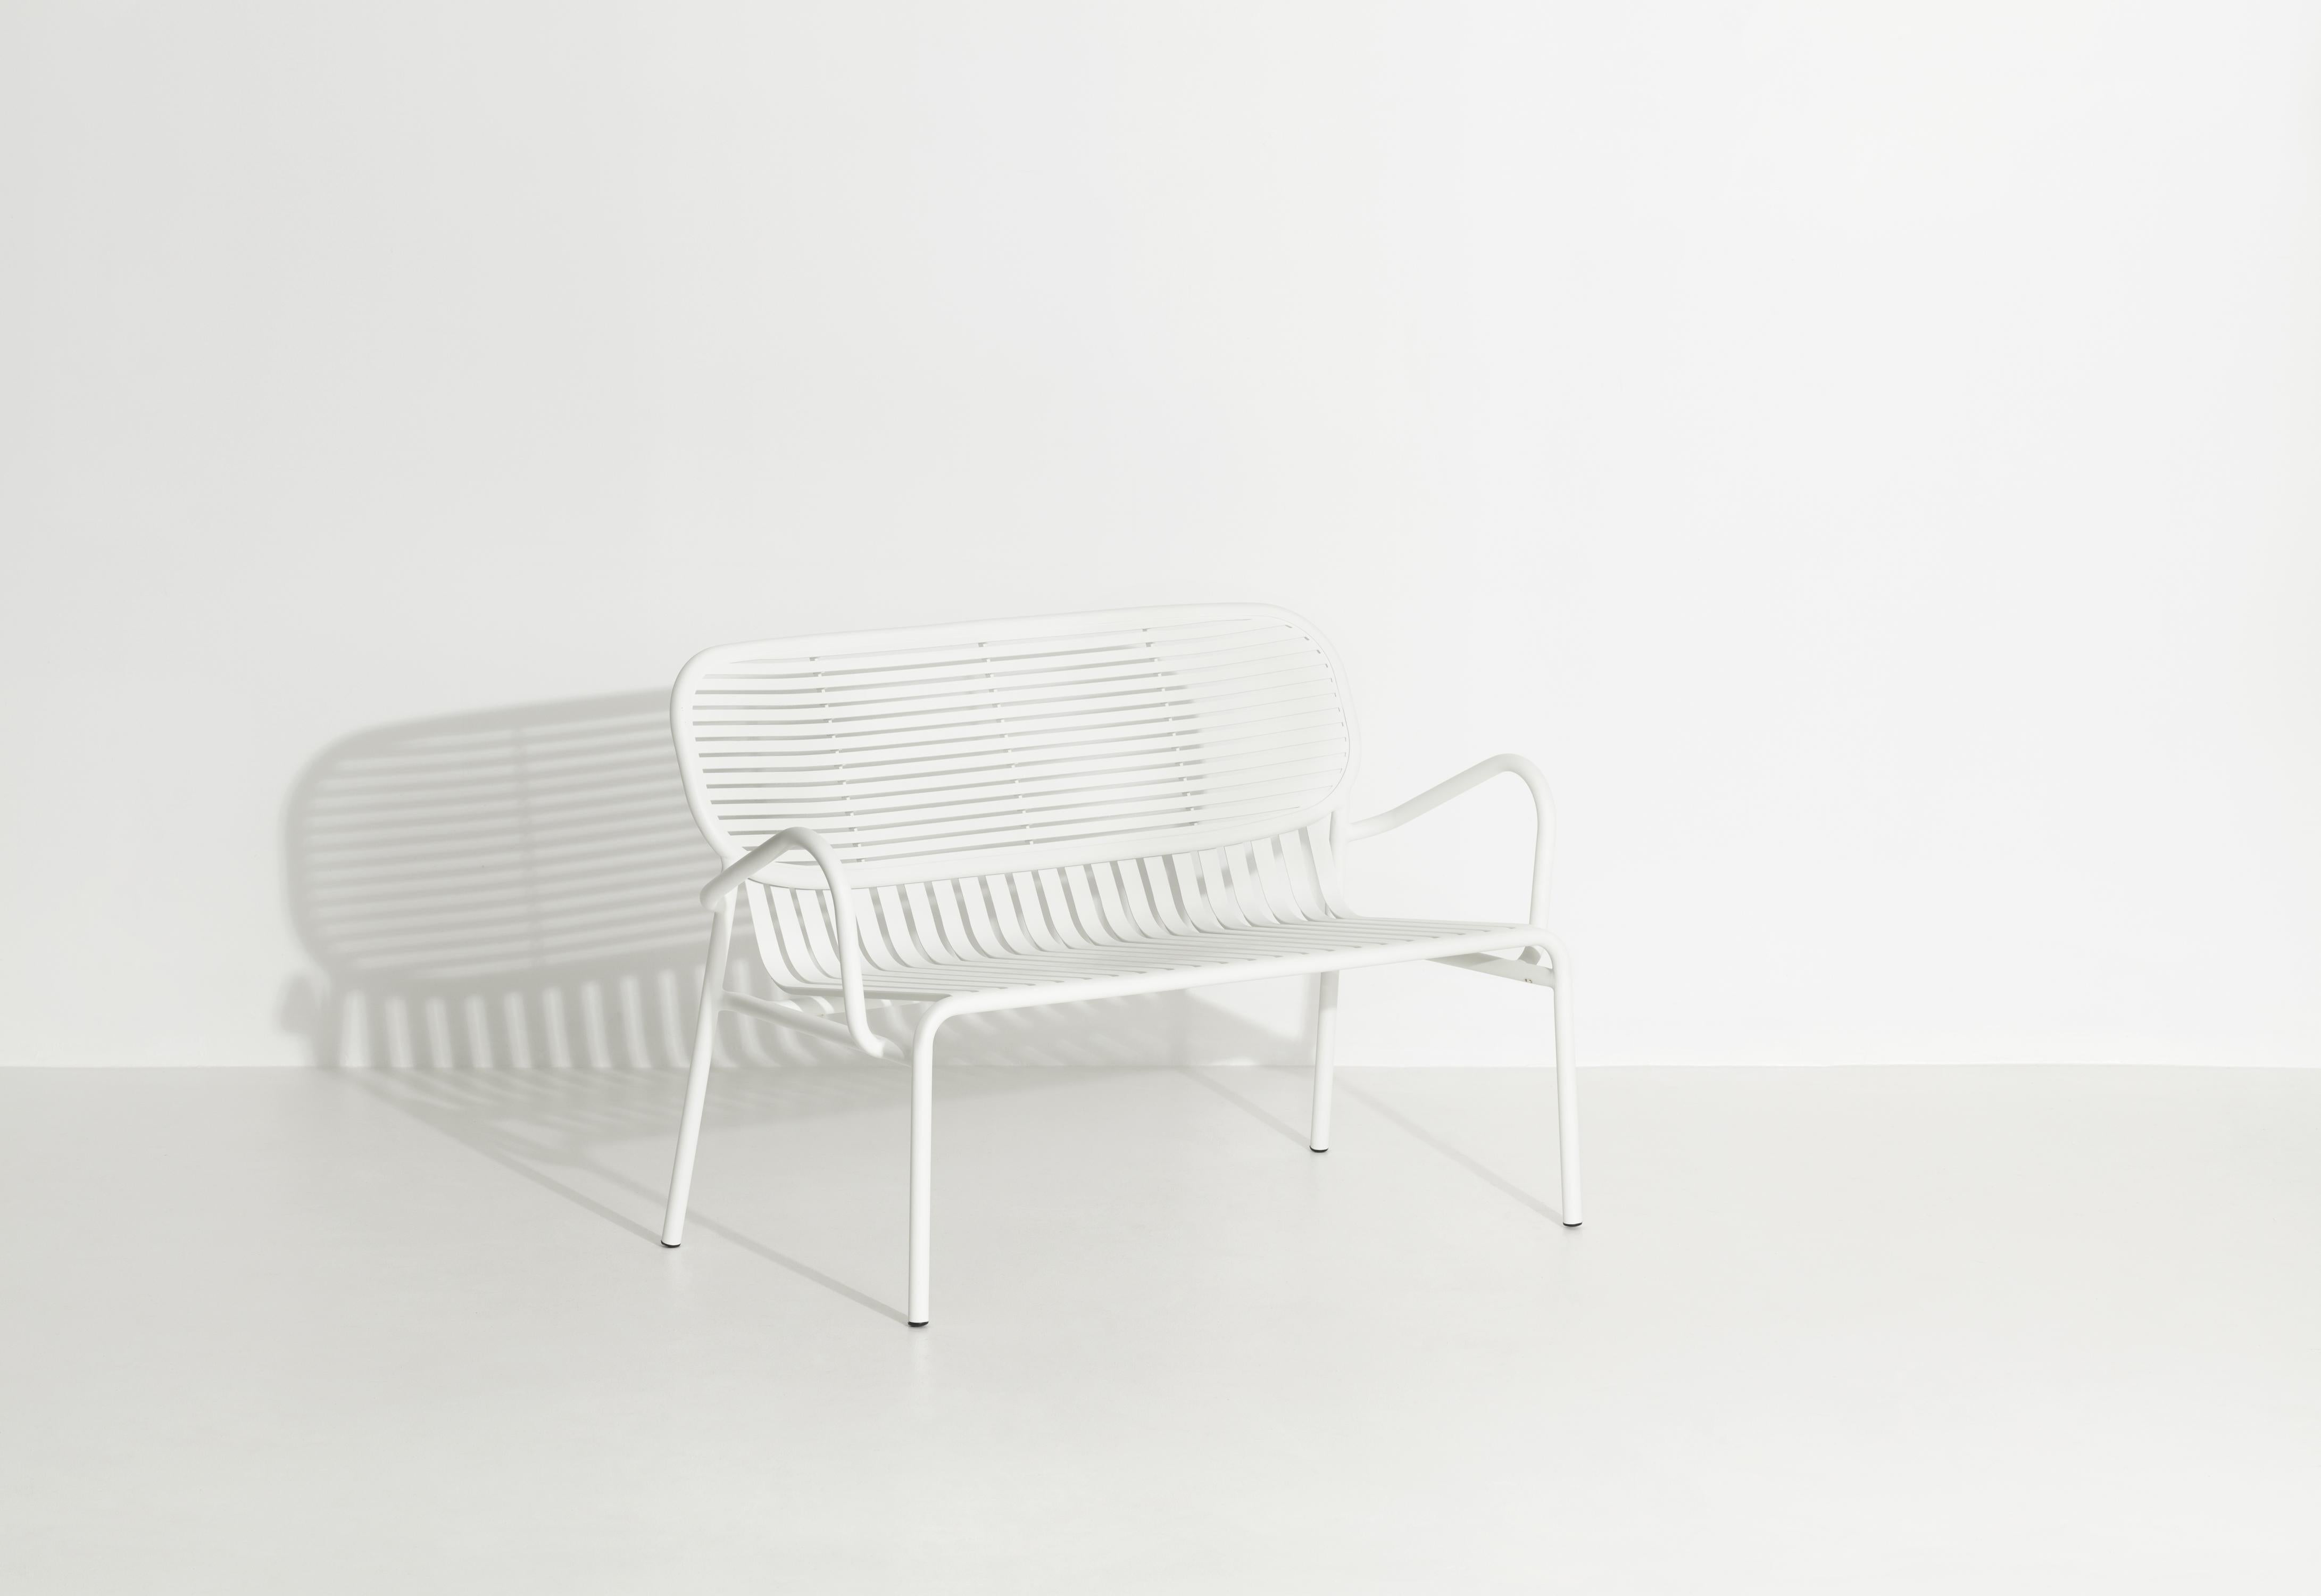 Petite Friture Week-End Sofa in White Aluminium by Studio BrichetZiegler In New Condition For Sale In Brooklyn, NY